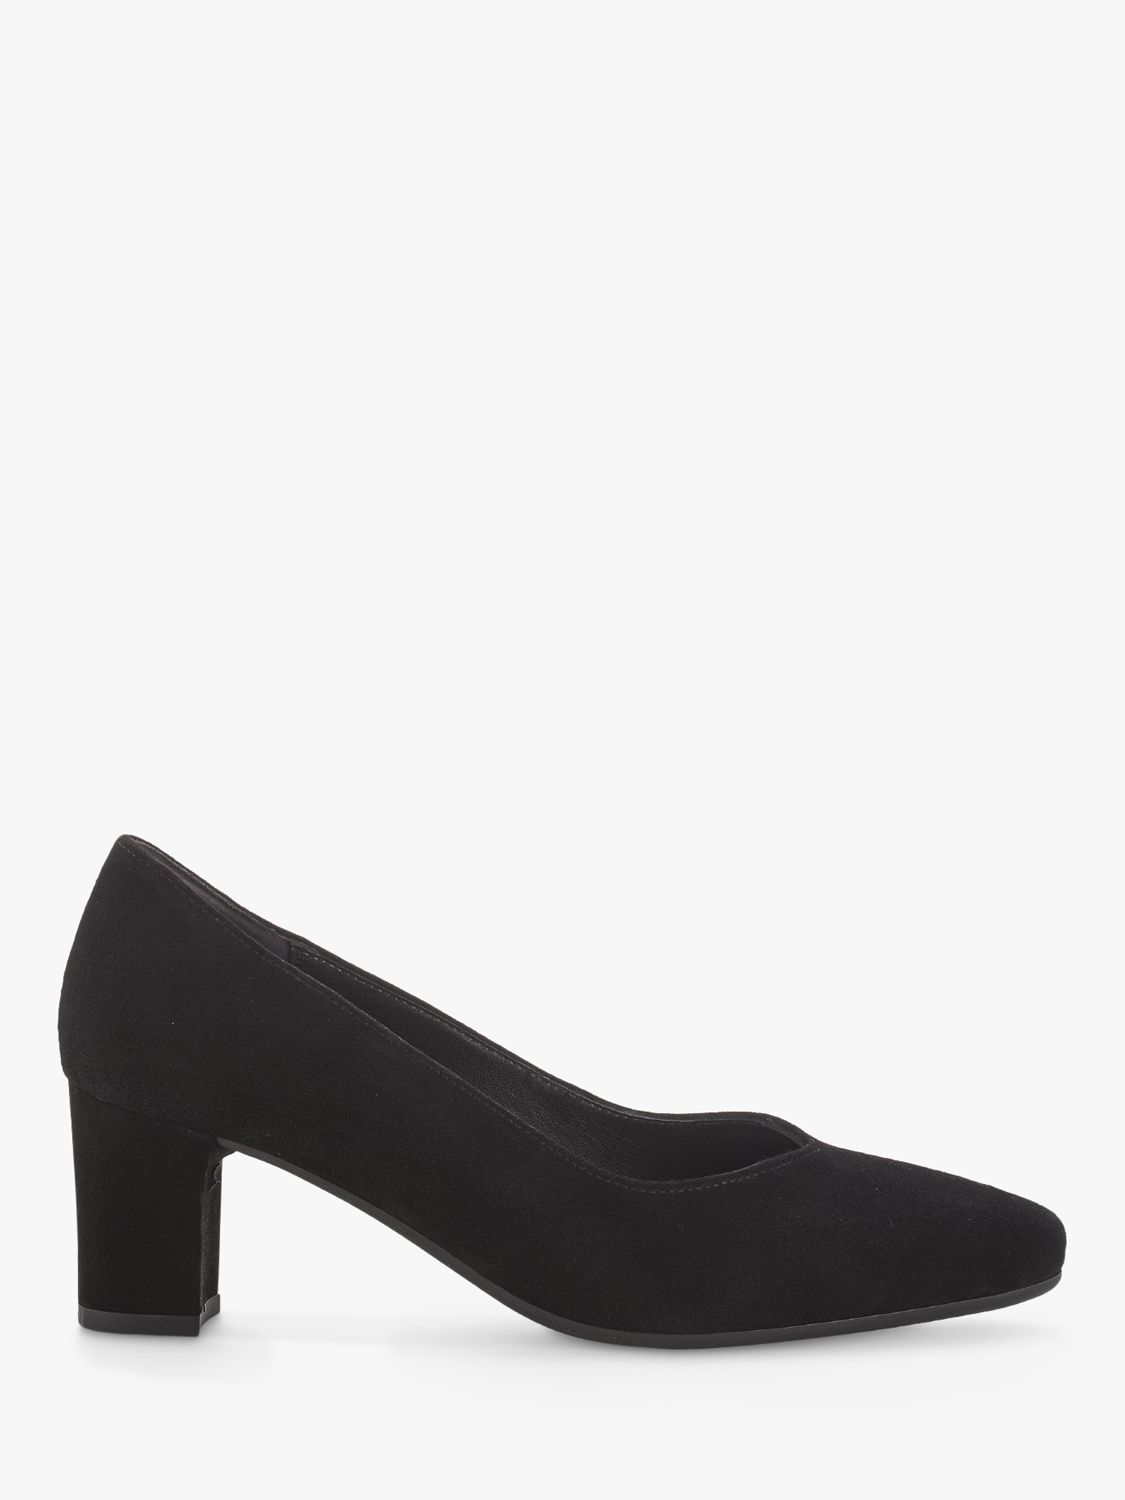 Gabor Helga Wide Fit Suede Court Shoes, Black at John Lewis & Partners